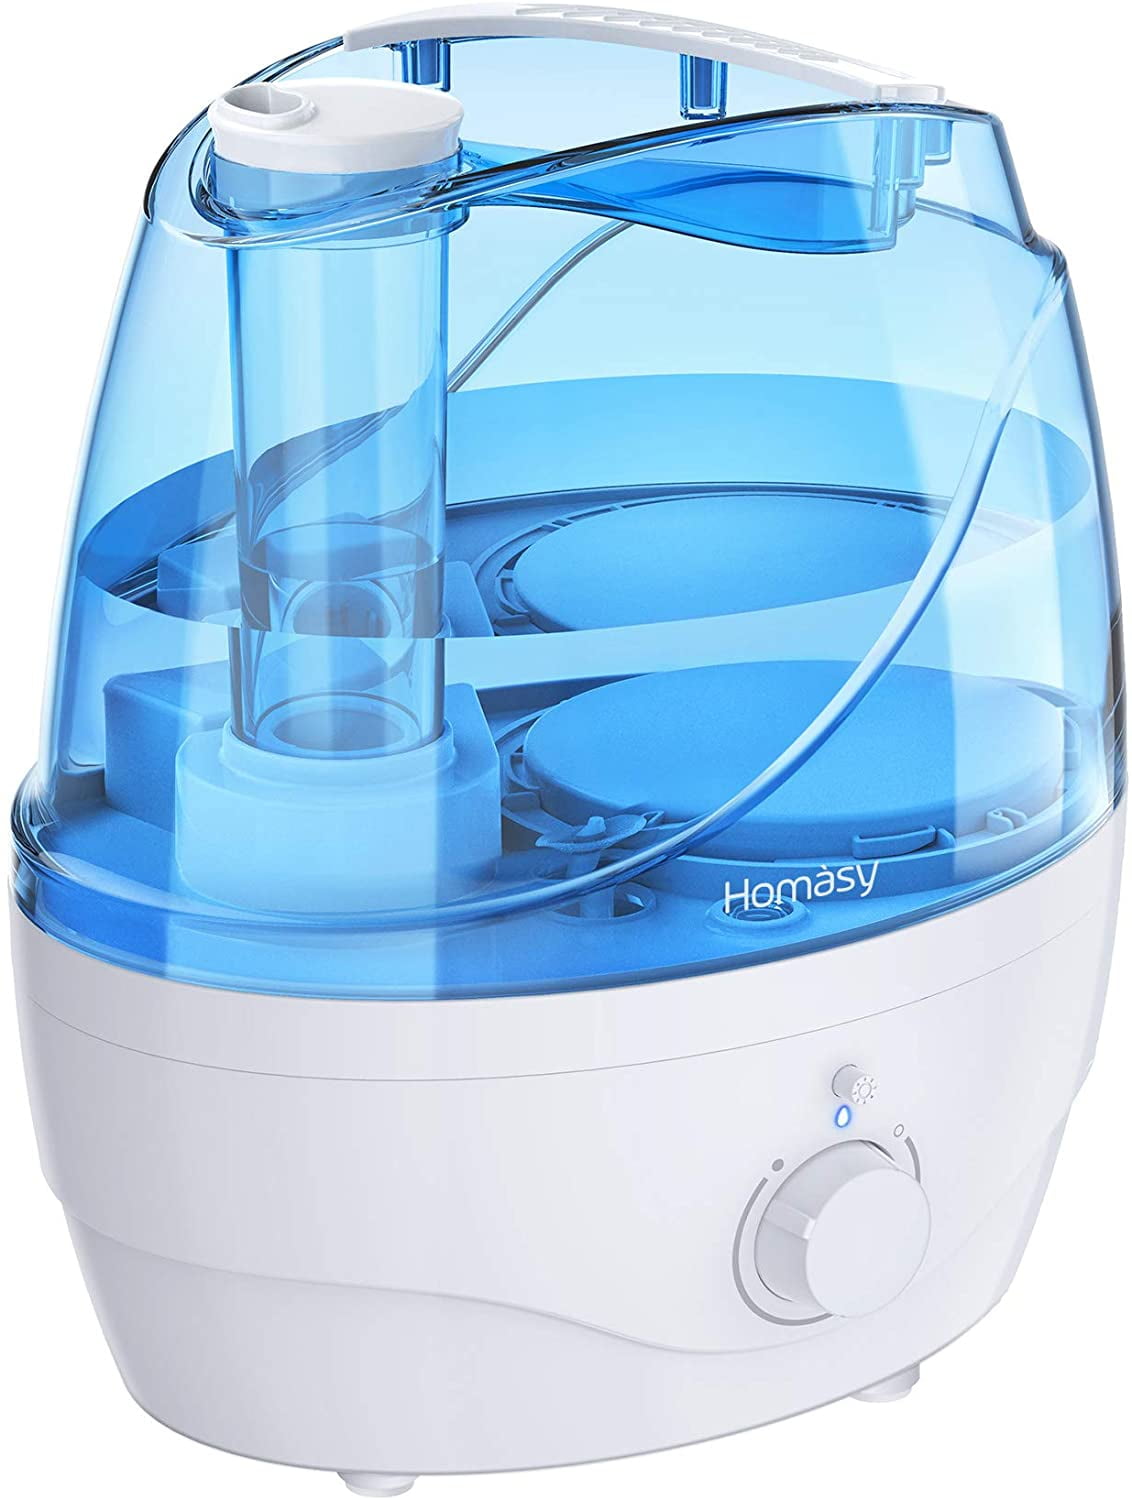 7 Best Humidifiers 2021 & Skin Benefits Of Humidifiers — lentilhouse25